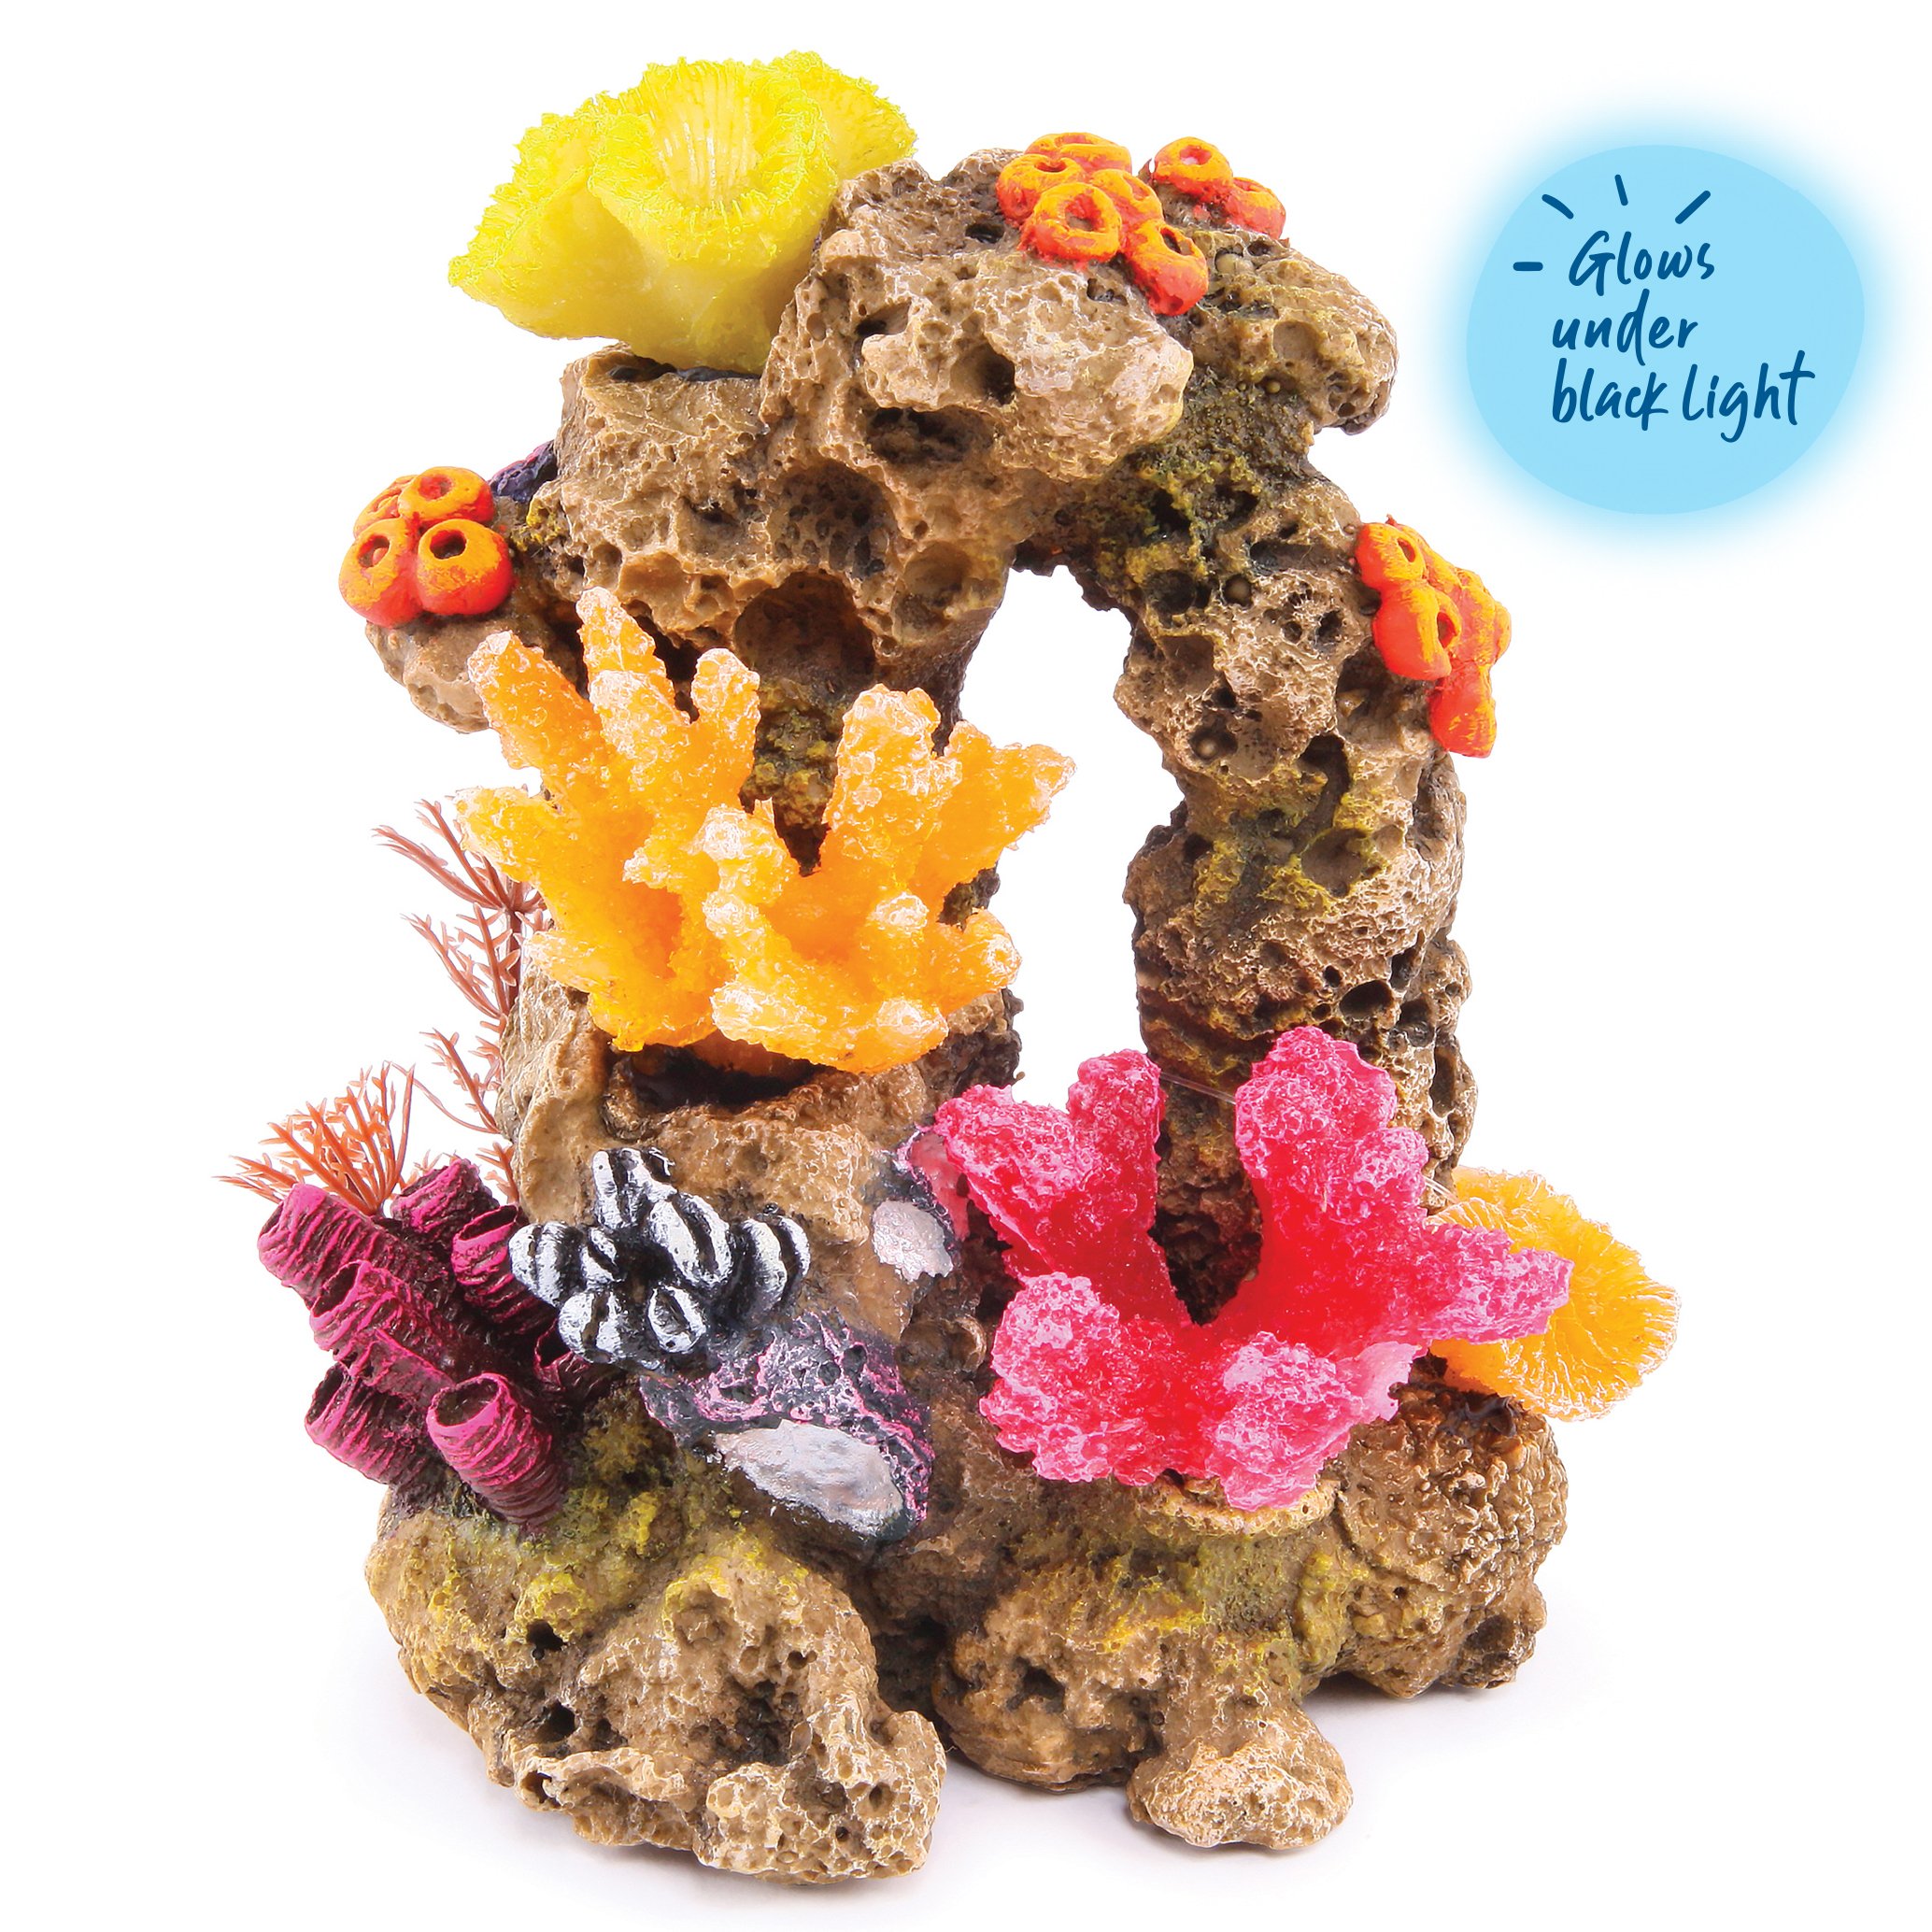 Reef Rock With Coral & Plants – Medium